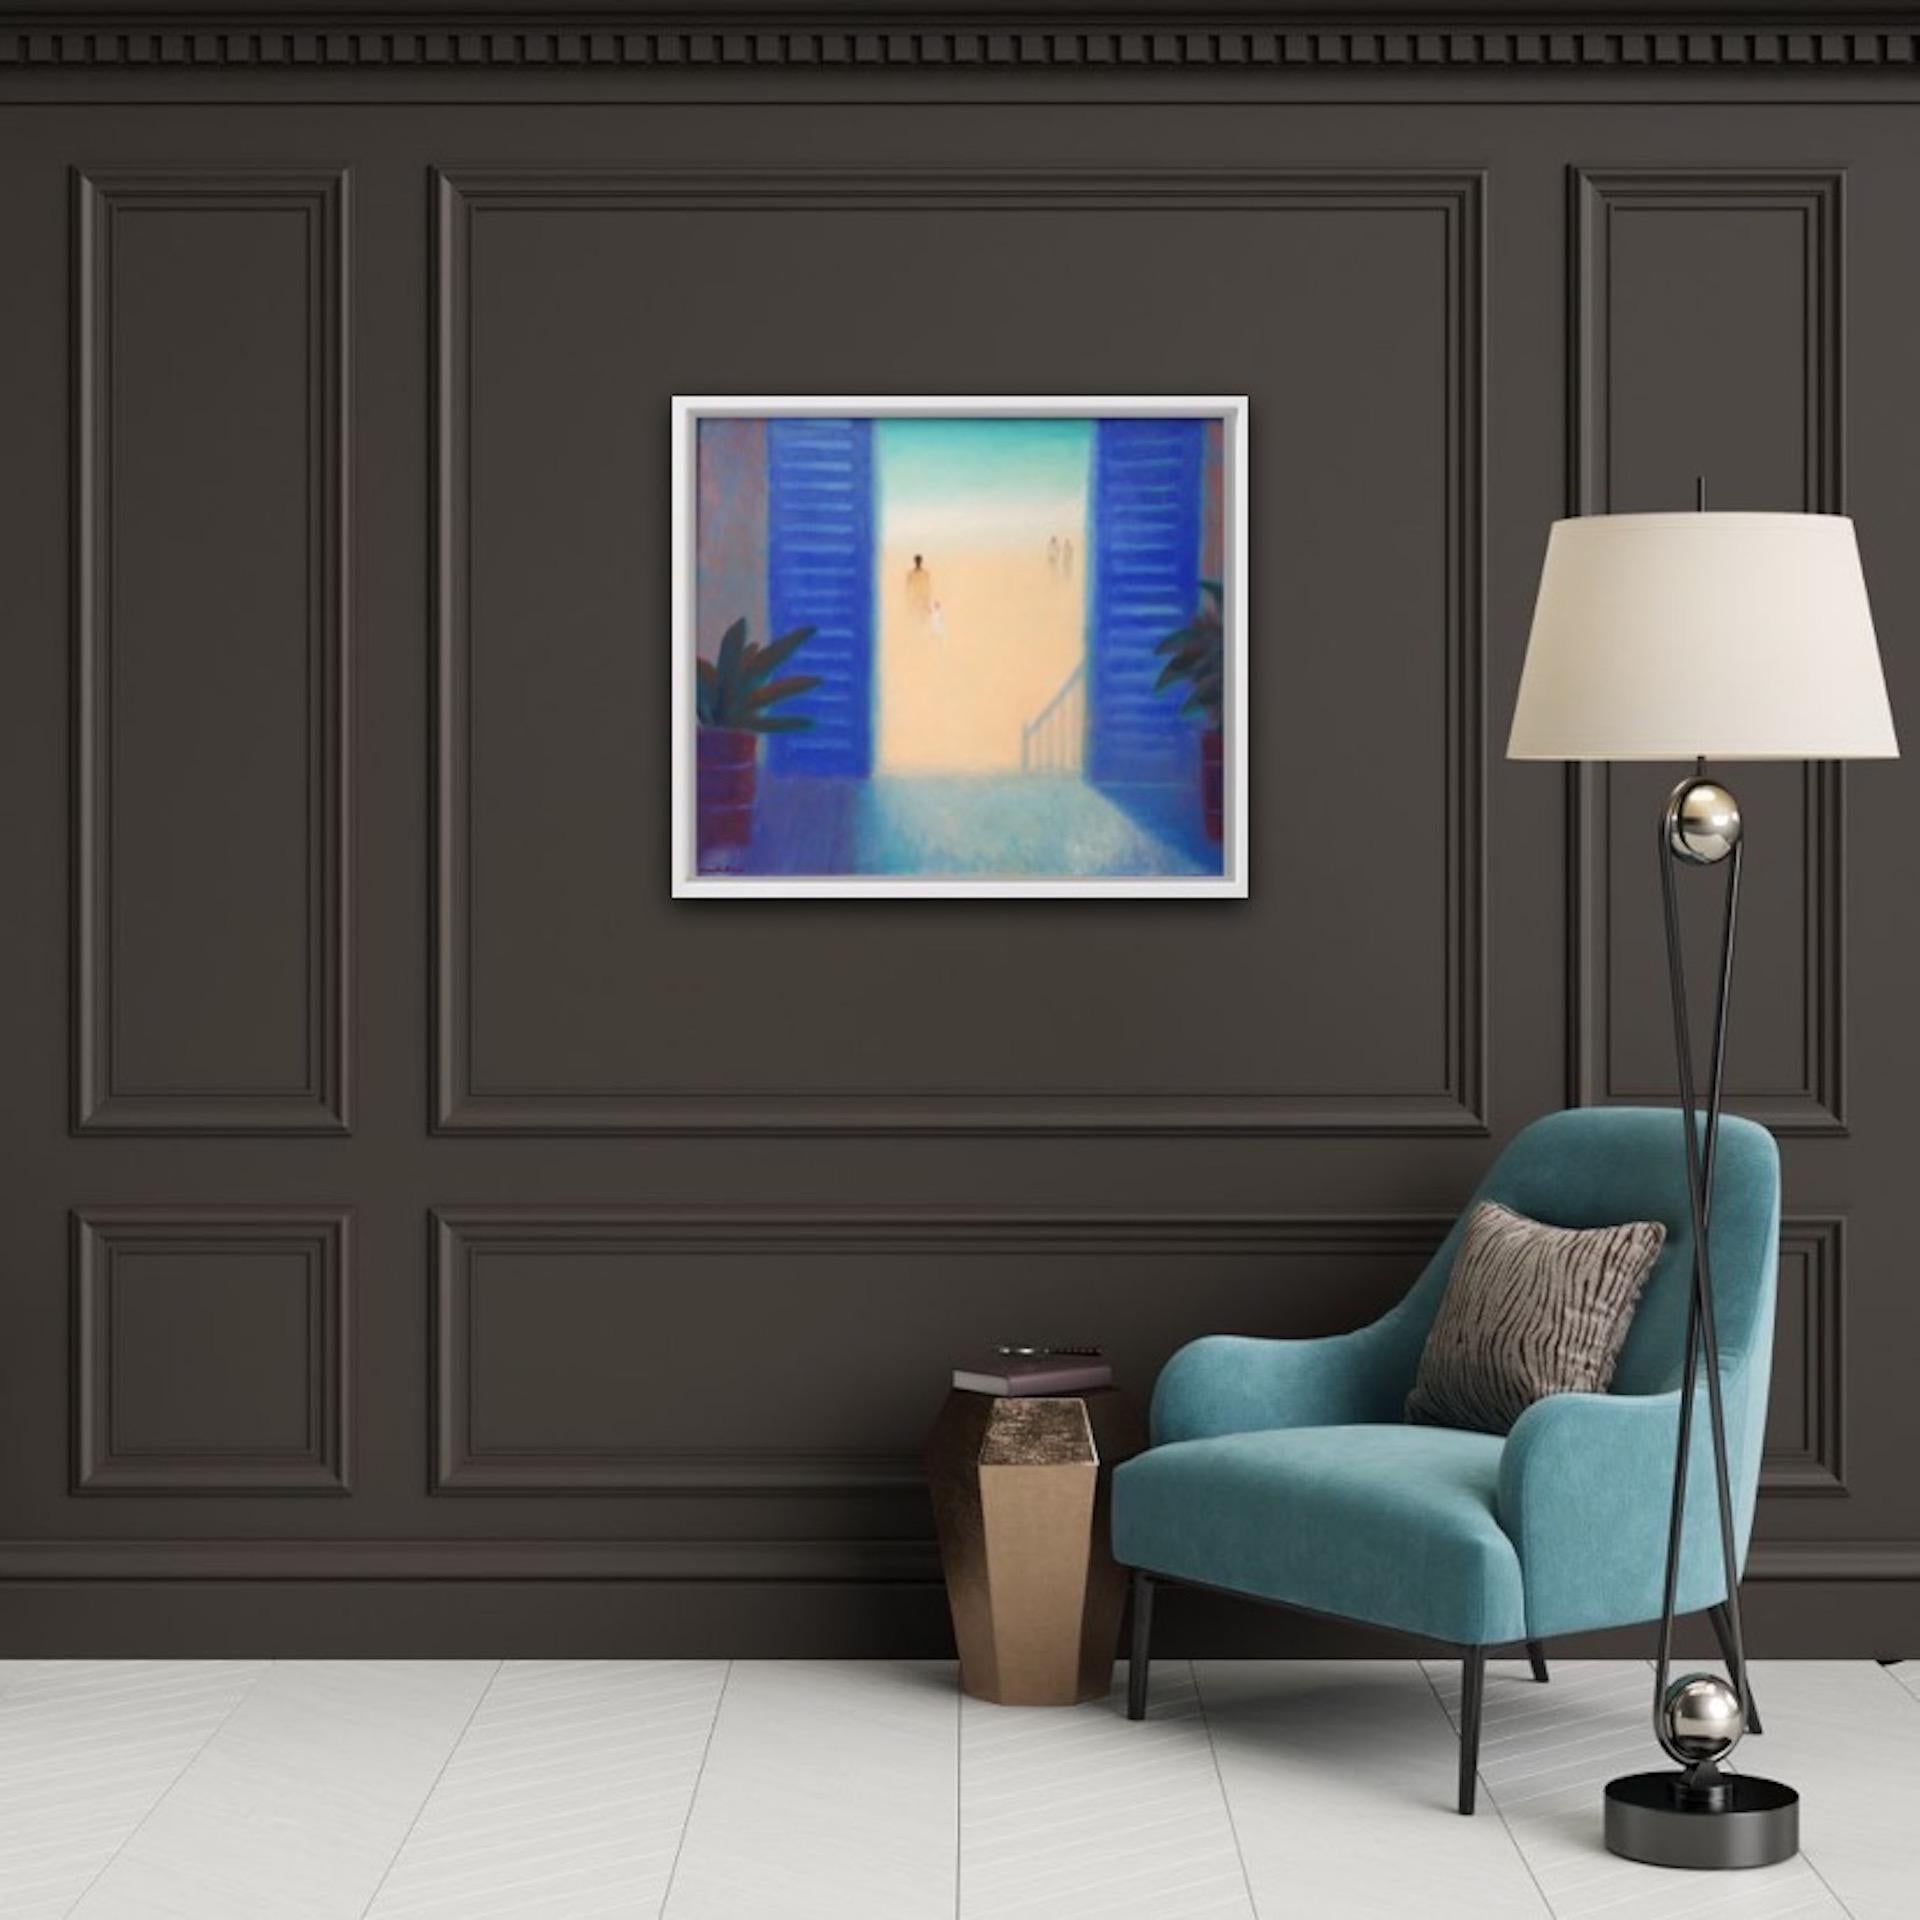 Charlie Baird
Blue Shutters
Original Painting
Oil Paint on Canvas
Framed Size: H 58cm x W 66cm x D 3cm
Sold Framed in a Grey Frame
Please note that in situ images are purely an indication of how a piece may look.

Blue Shutters is an original